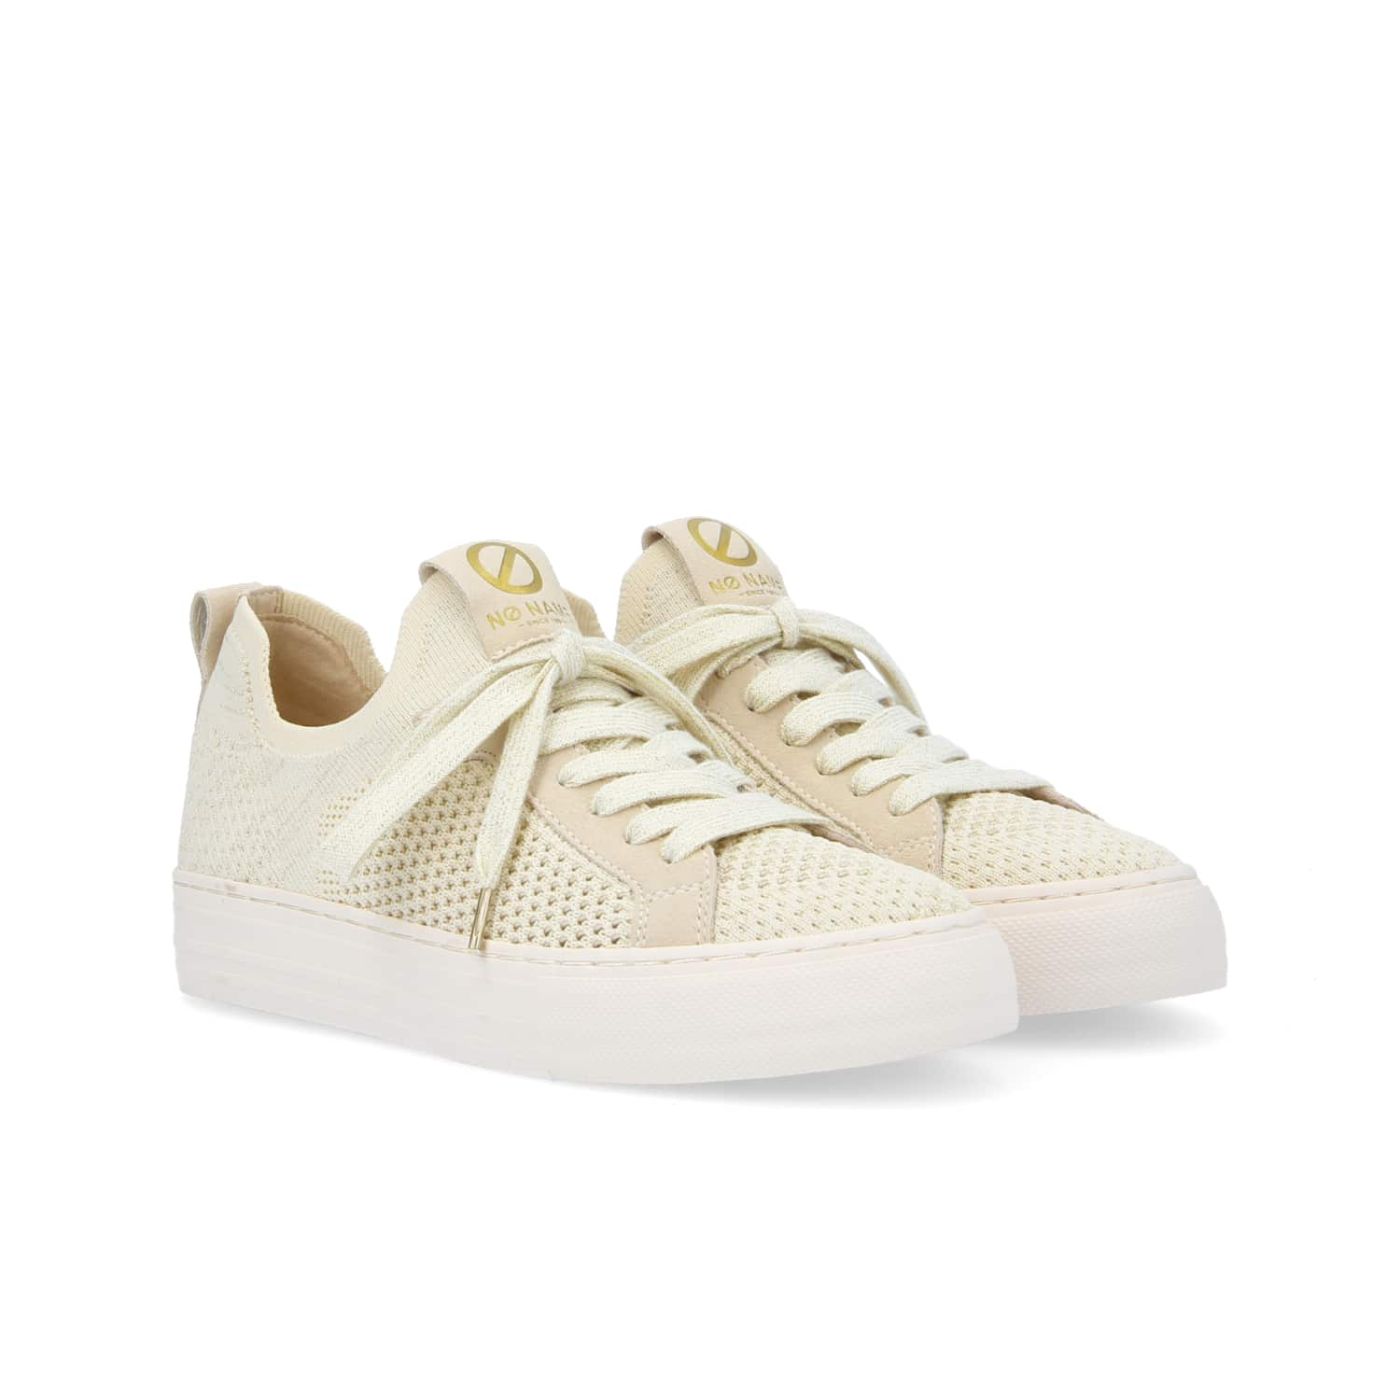 ARCADE FLY W - FLEX RECYCLED - DOVE/LIGHT GOLD